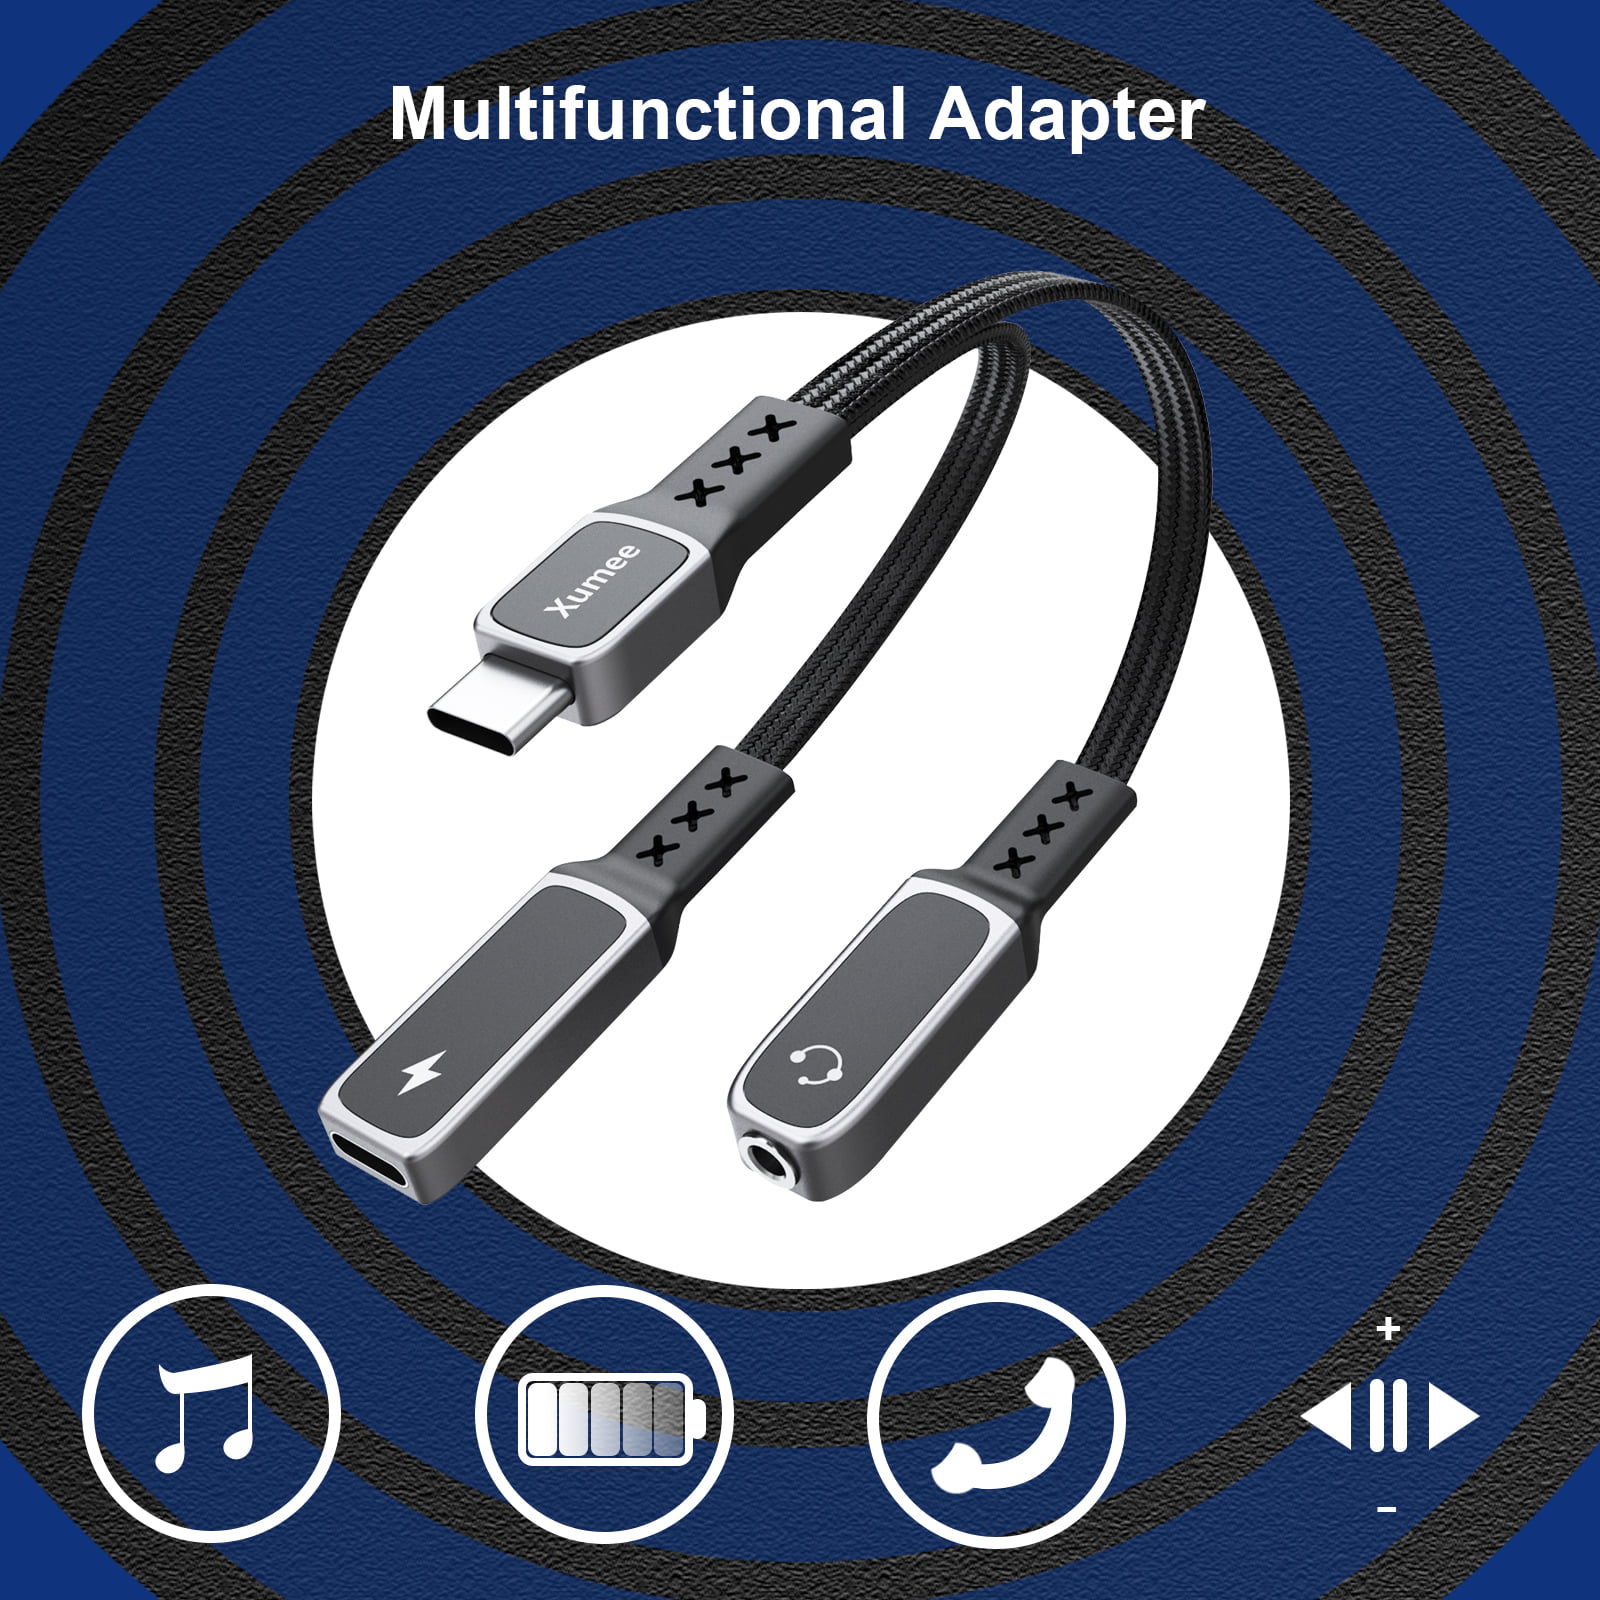 C to 3.5mm Audio Adapter and Charger,Xumee 2-in-1 USB-C splitter Aux and Charging, Type C Headphones Mic Jack Dongle with Pixel 5 4 XL, Galaxy S21 S20 S20+ Plus Note